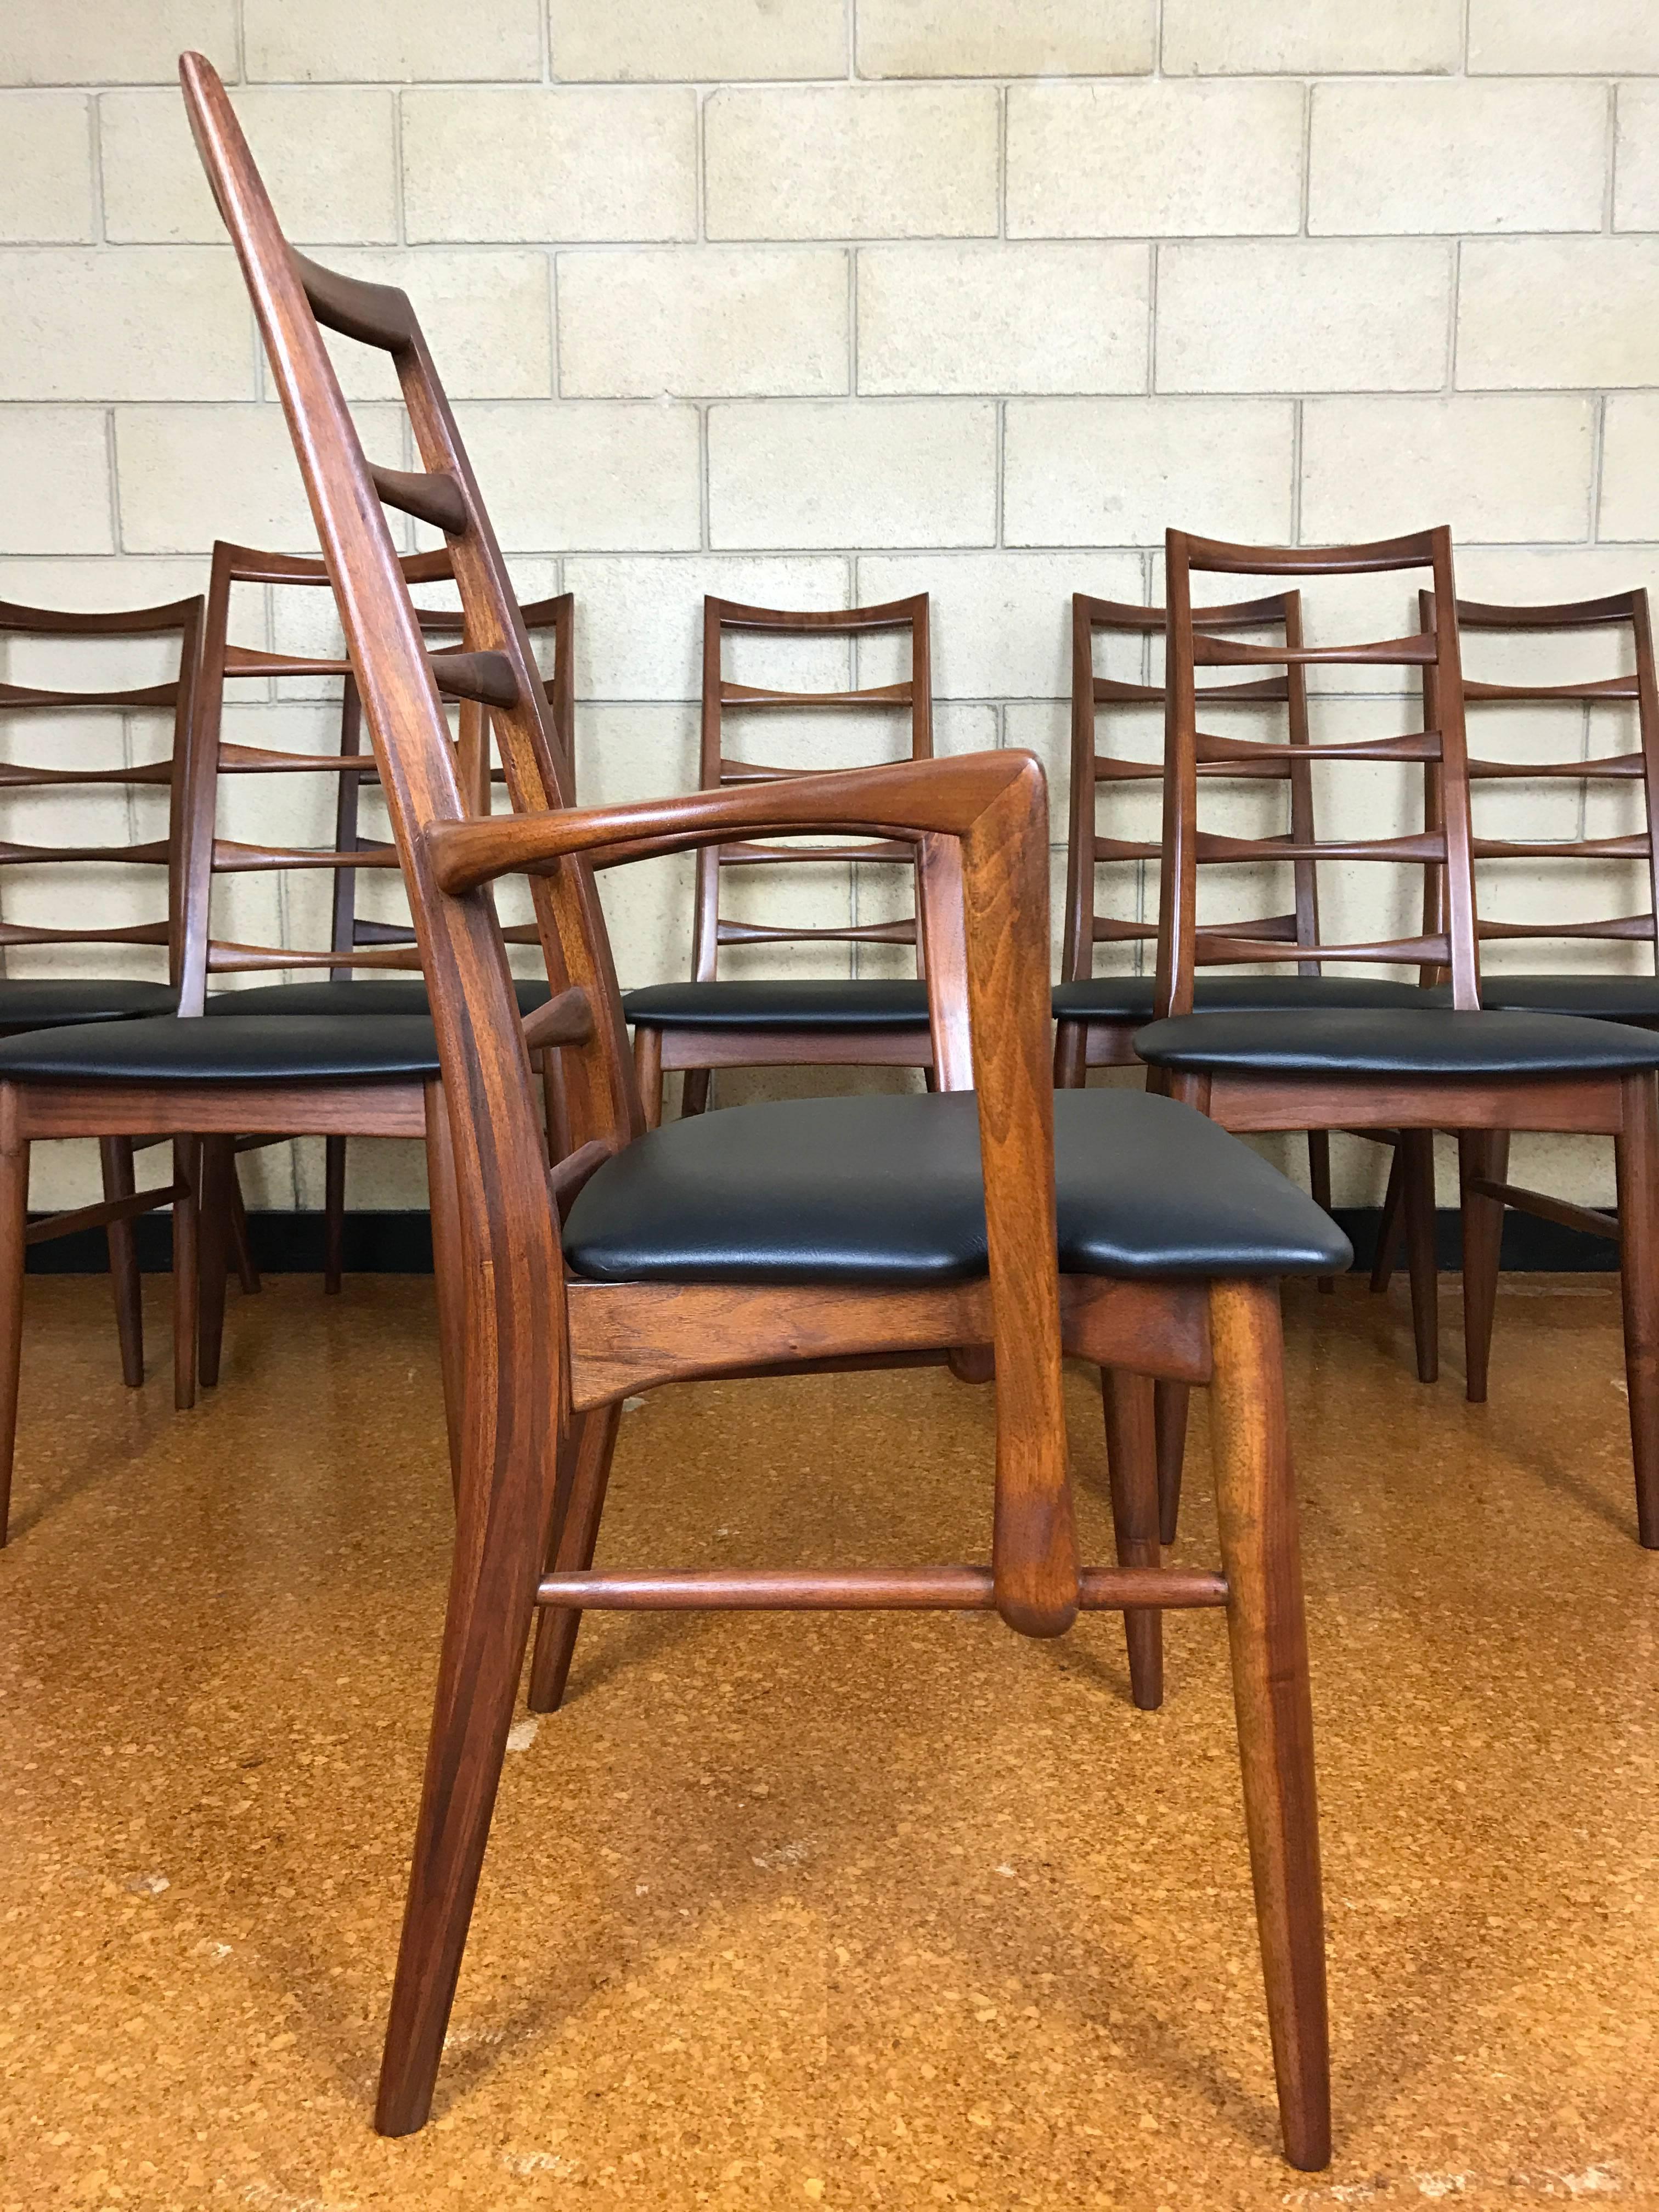 Eight Niels Koefoed for Koefoed Hornslet 'Liz' ladder-back dining chairs in walnut and Naugahyde, 1960s. Completely restored - frames refinished and new upholstery. 

Side chairs: 18.5 wide x 21 deep (top of back to front) x 37.5 tall. 
Armchair: